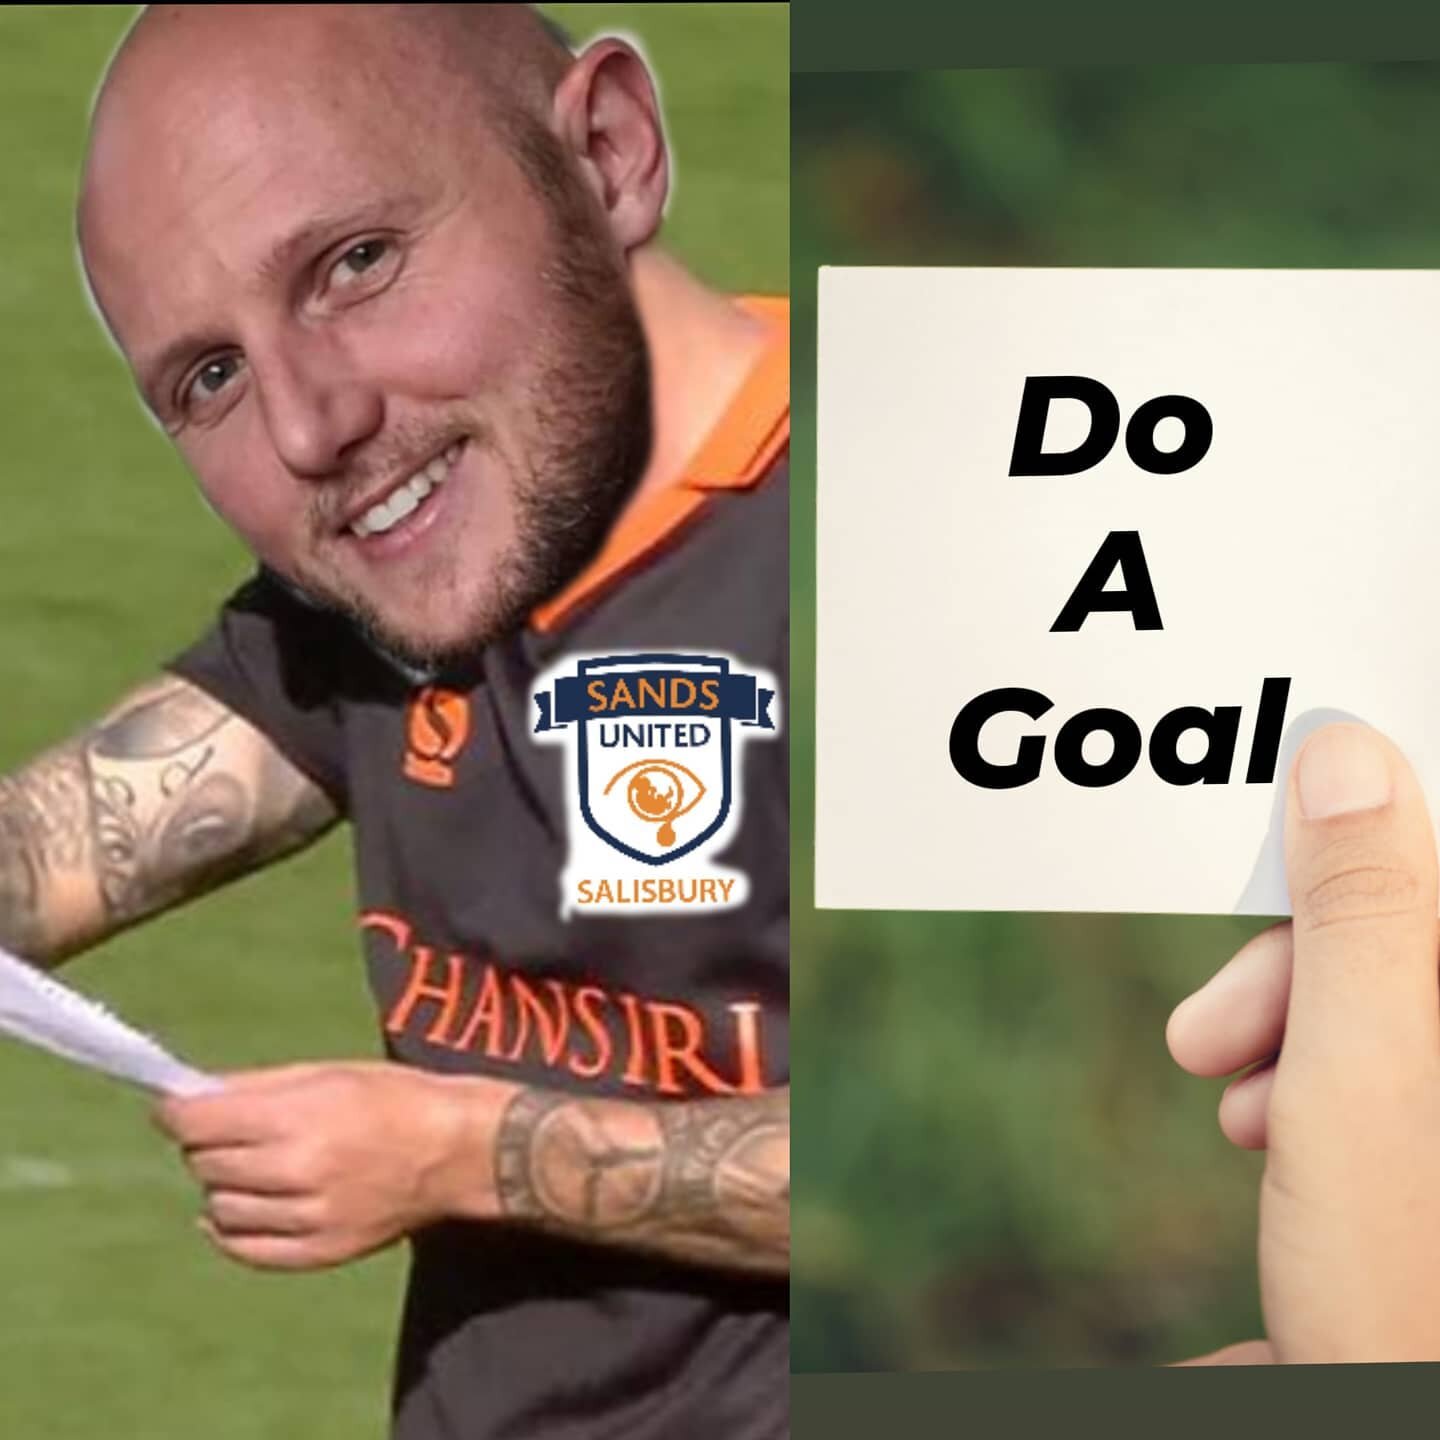 An insight into the brilliant mind of our manager @swoolford21 and the notes he passes skipper @robmaddison during matches

#sufcsalisbury #sandsunited #tacticalgenius #mastermind